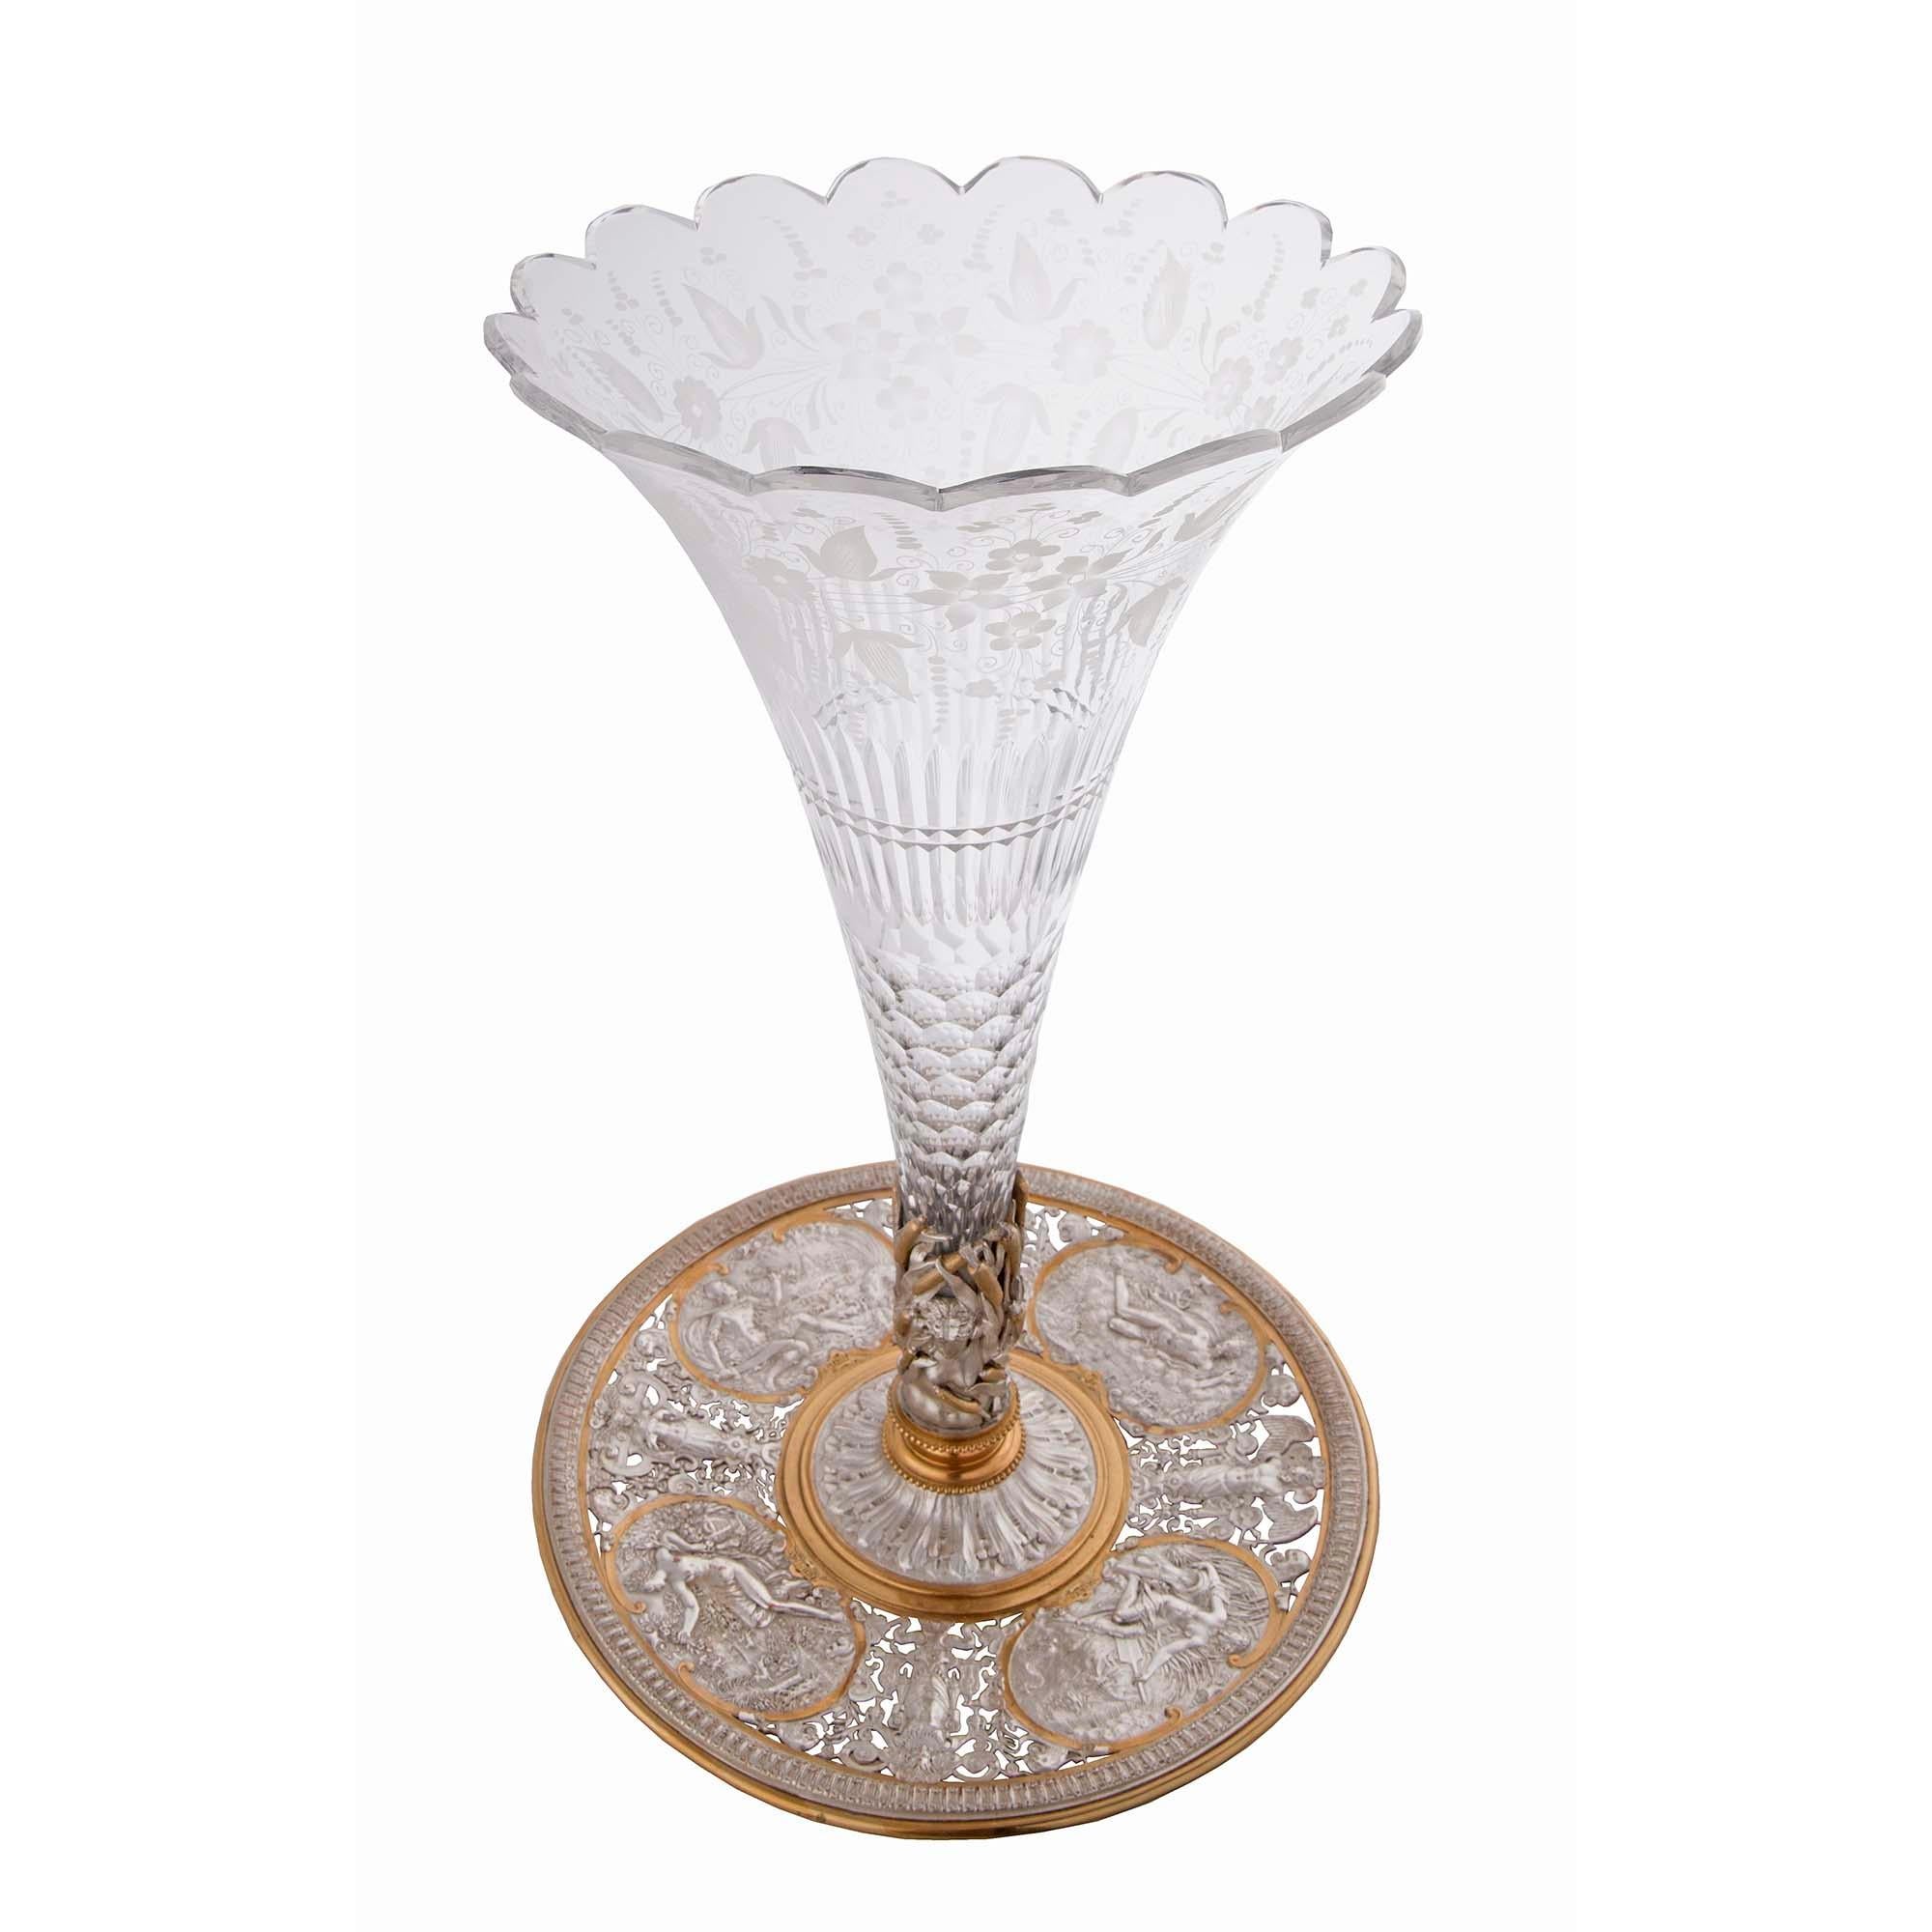 A charming French 19th century Louis XVI st. Baccarat crystal vase. The vase is raised by four fine foliate feet below the circular ormolu and silvered bronze tray. The tray is decorated with a lovely egg and dart border and has four richly chased